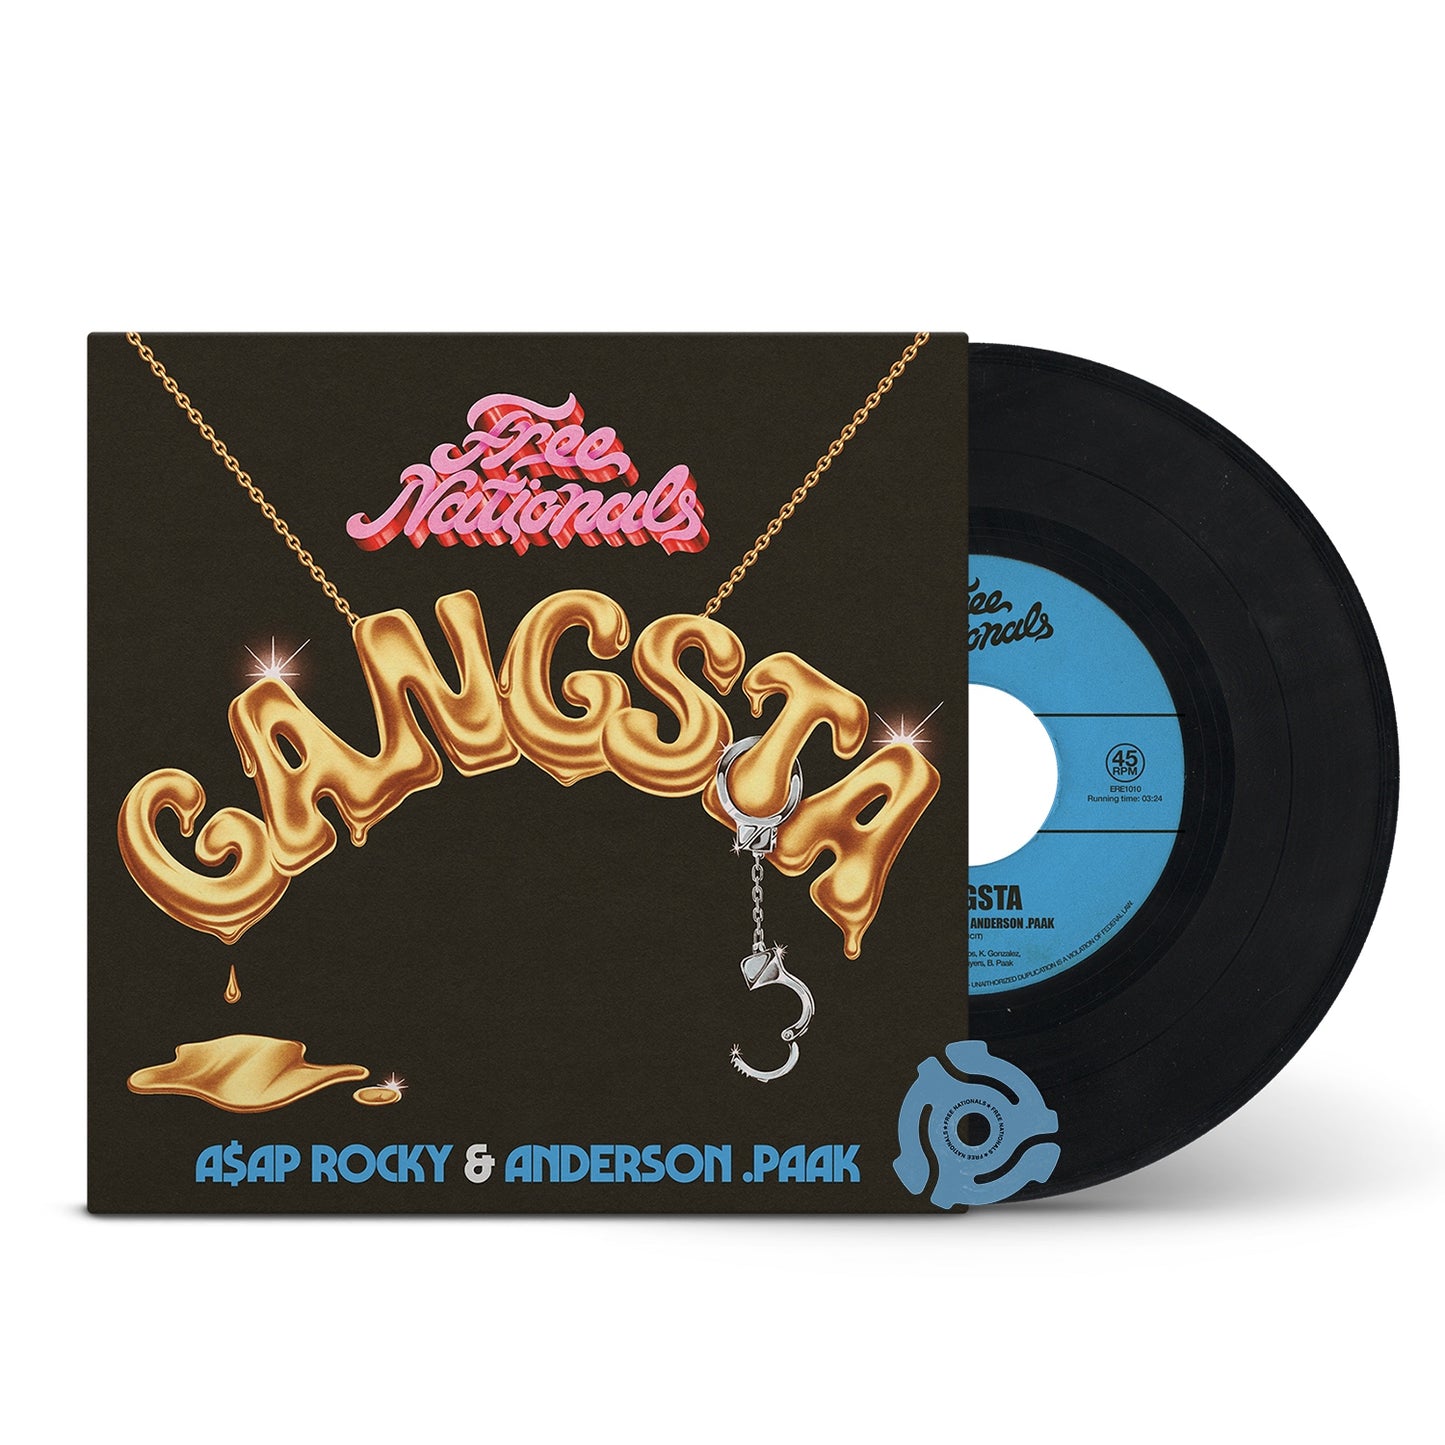 Pre Order - Free Nationals - Gangsta - feat. A$AP Rocky & Anderson .Paak - 7" Single - Last 1